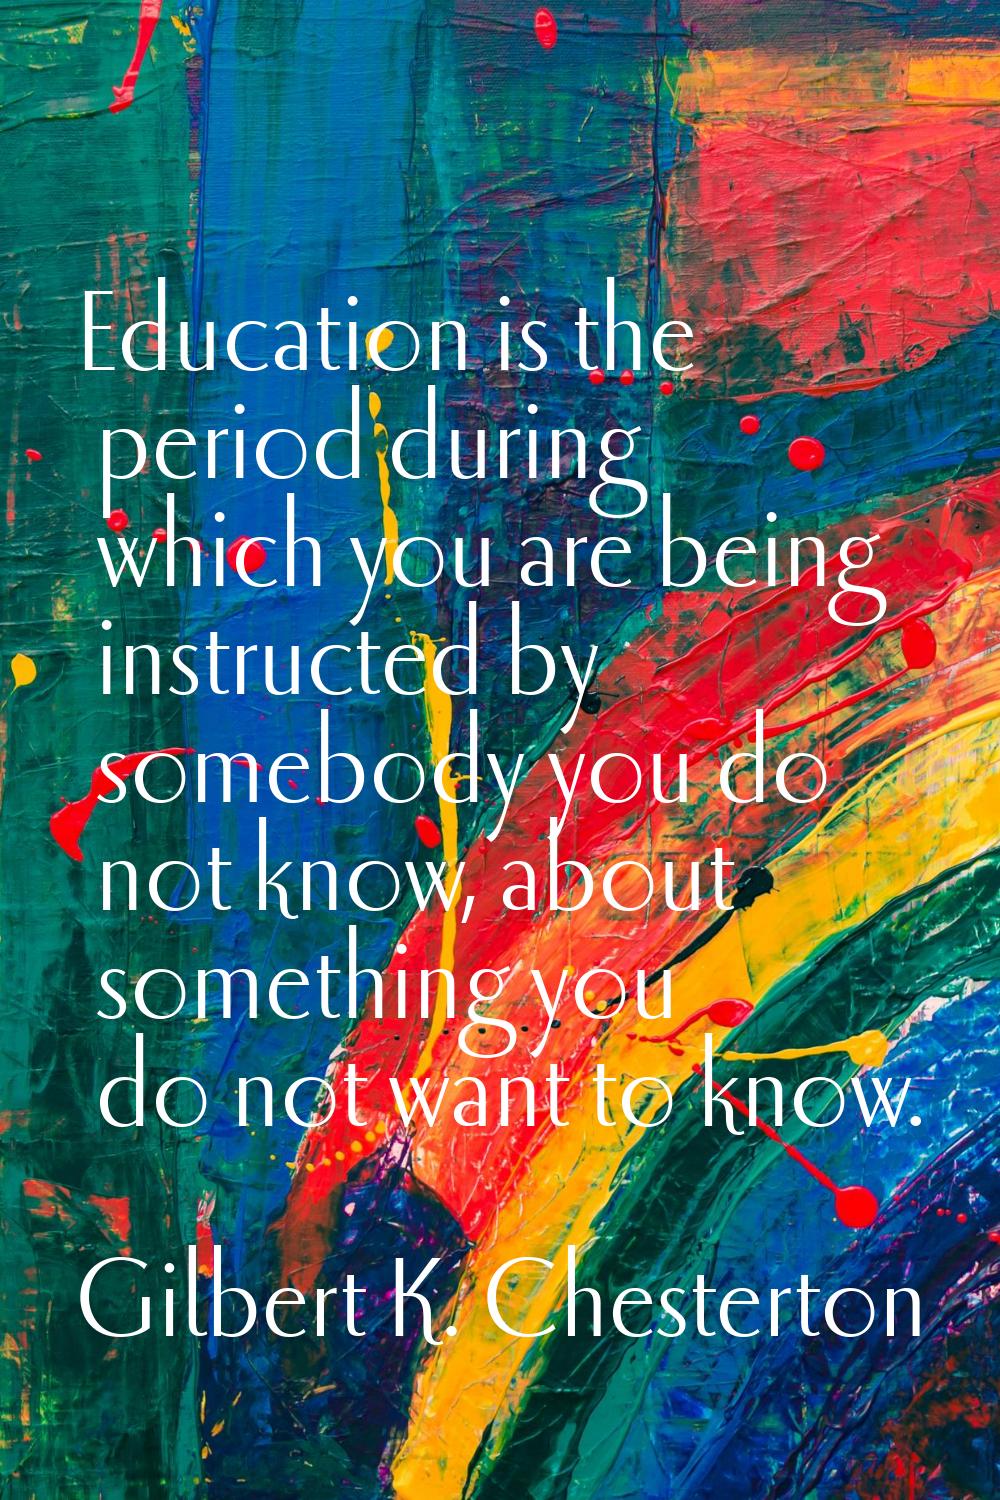 Education is the period during which you are being instructed by somebody you do not know, about so